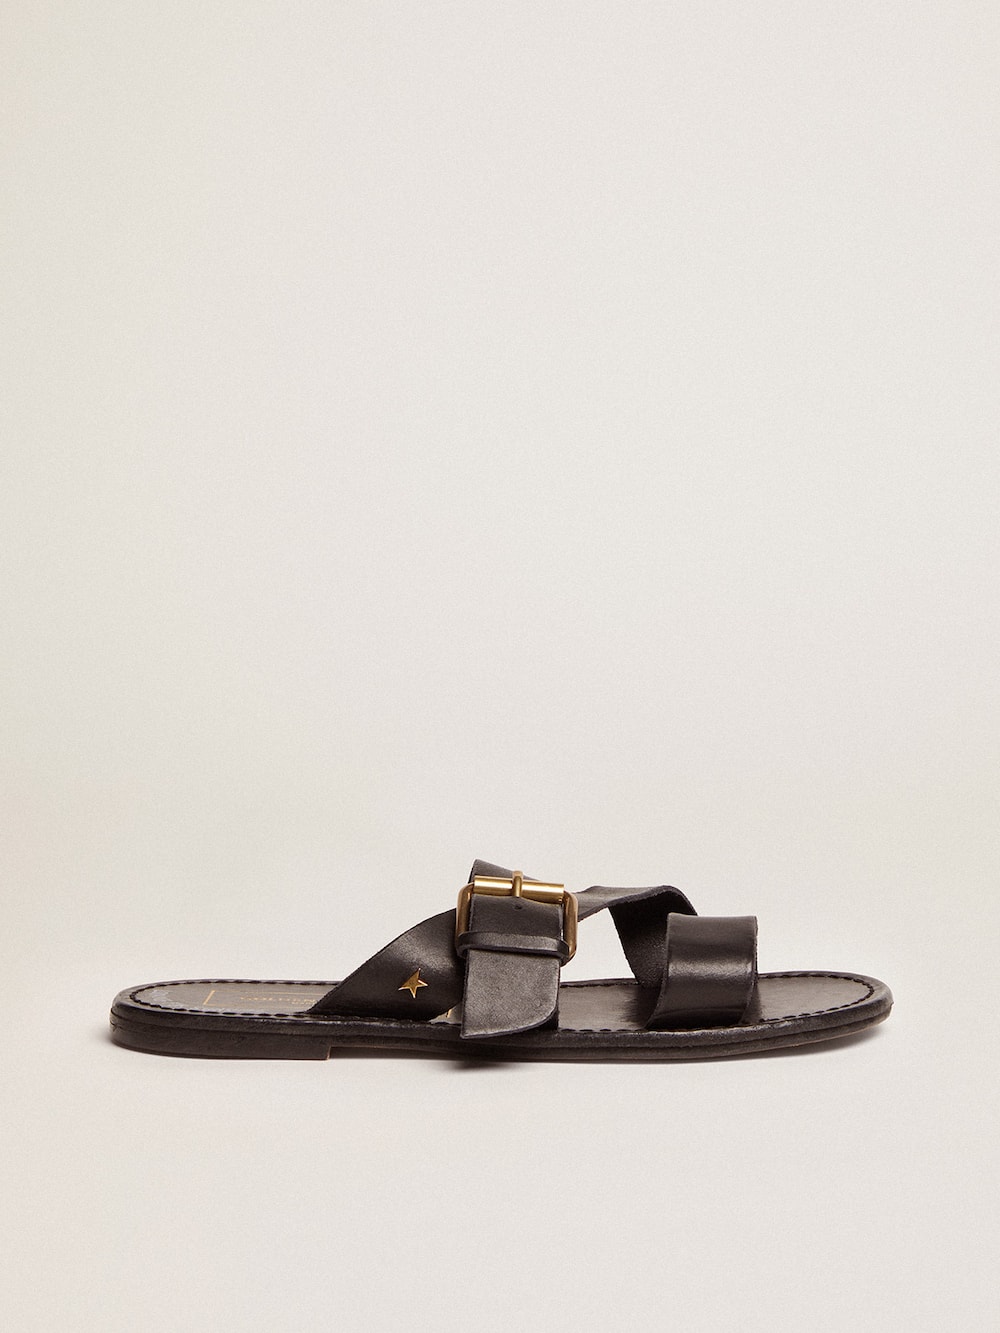 Golden Goose - Women's flat sandals in black resin-coated leather in 